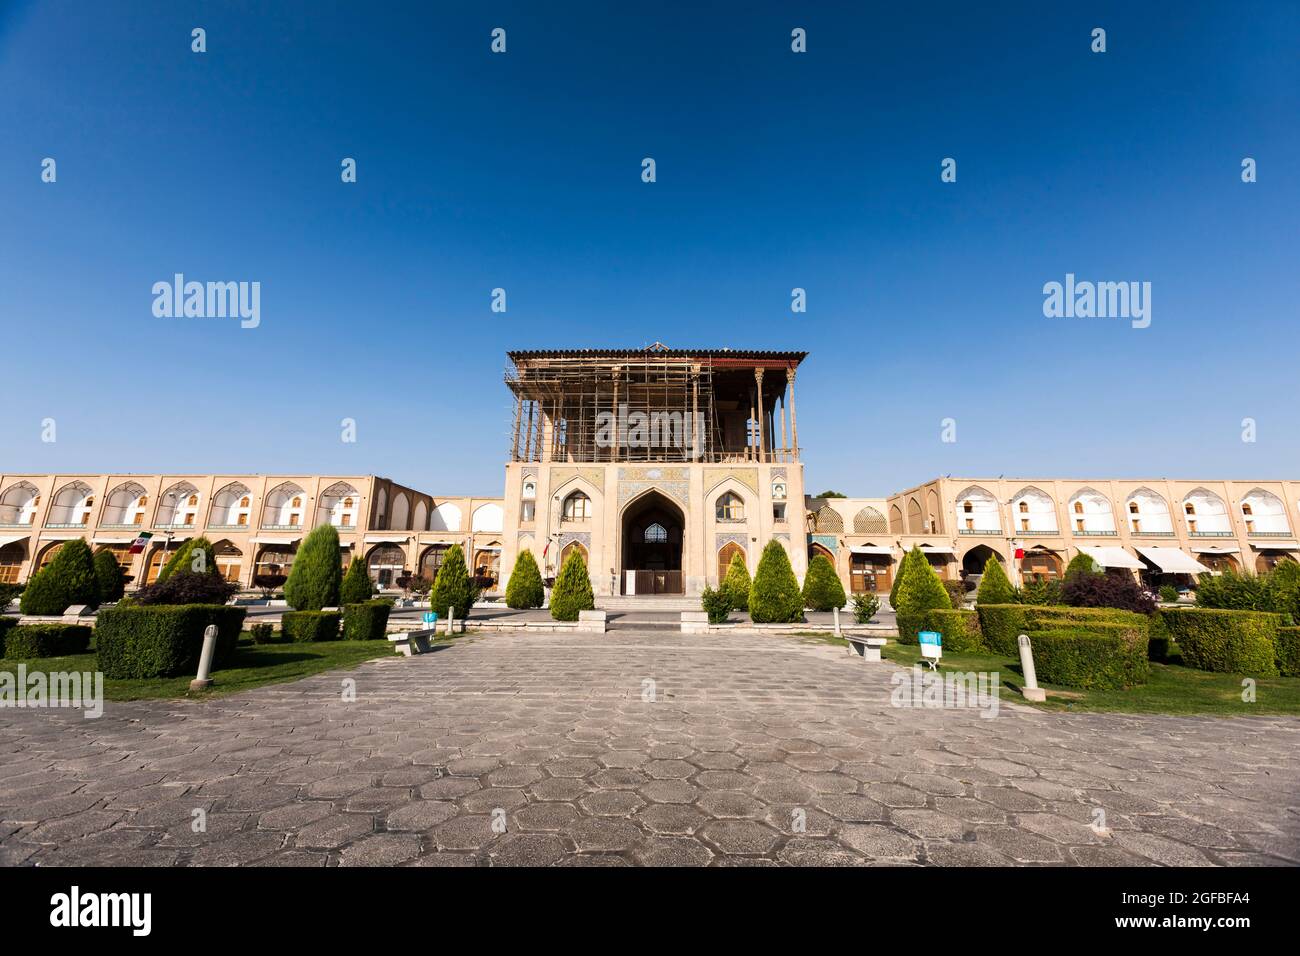 Palais Ali qapu, place Imam, Isfahan (Esfahan), province d'Isfahan, Iran, Perse, Asie occidentale, Asie Banque D'Images